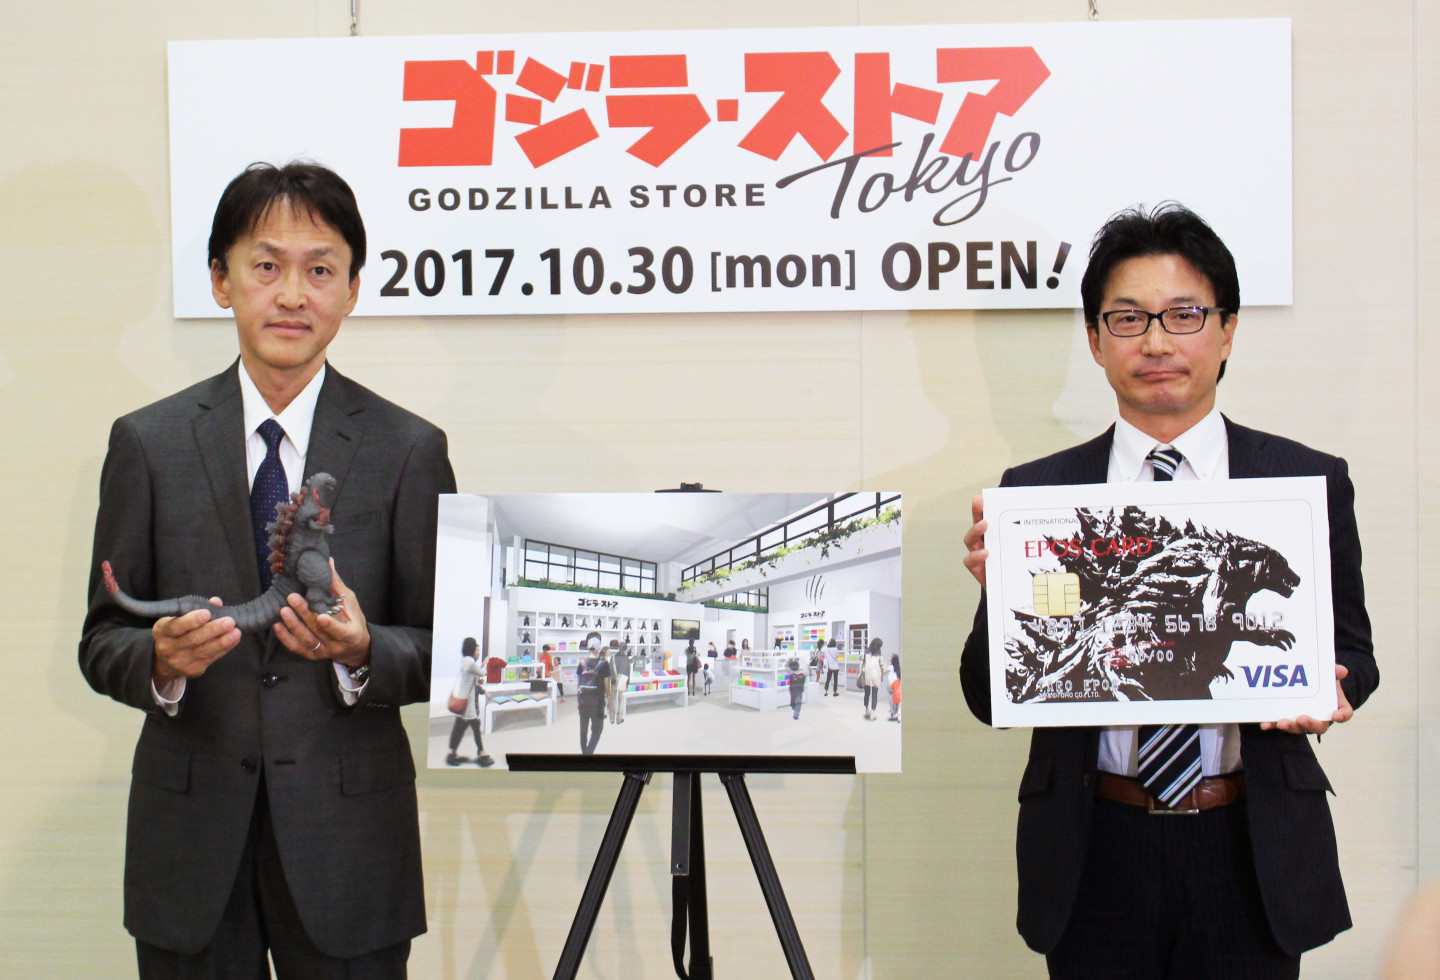 World’s First Official Godzilla Store Opening In Tokyo Next Month